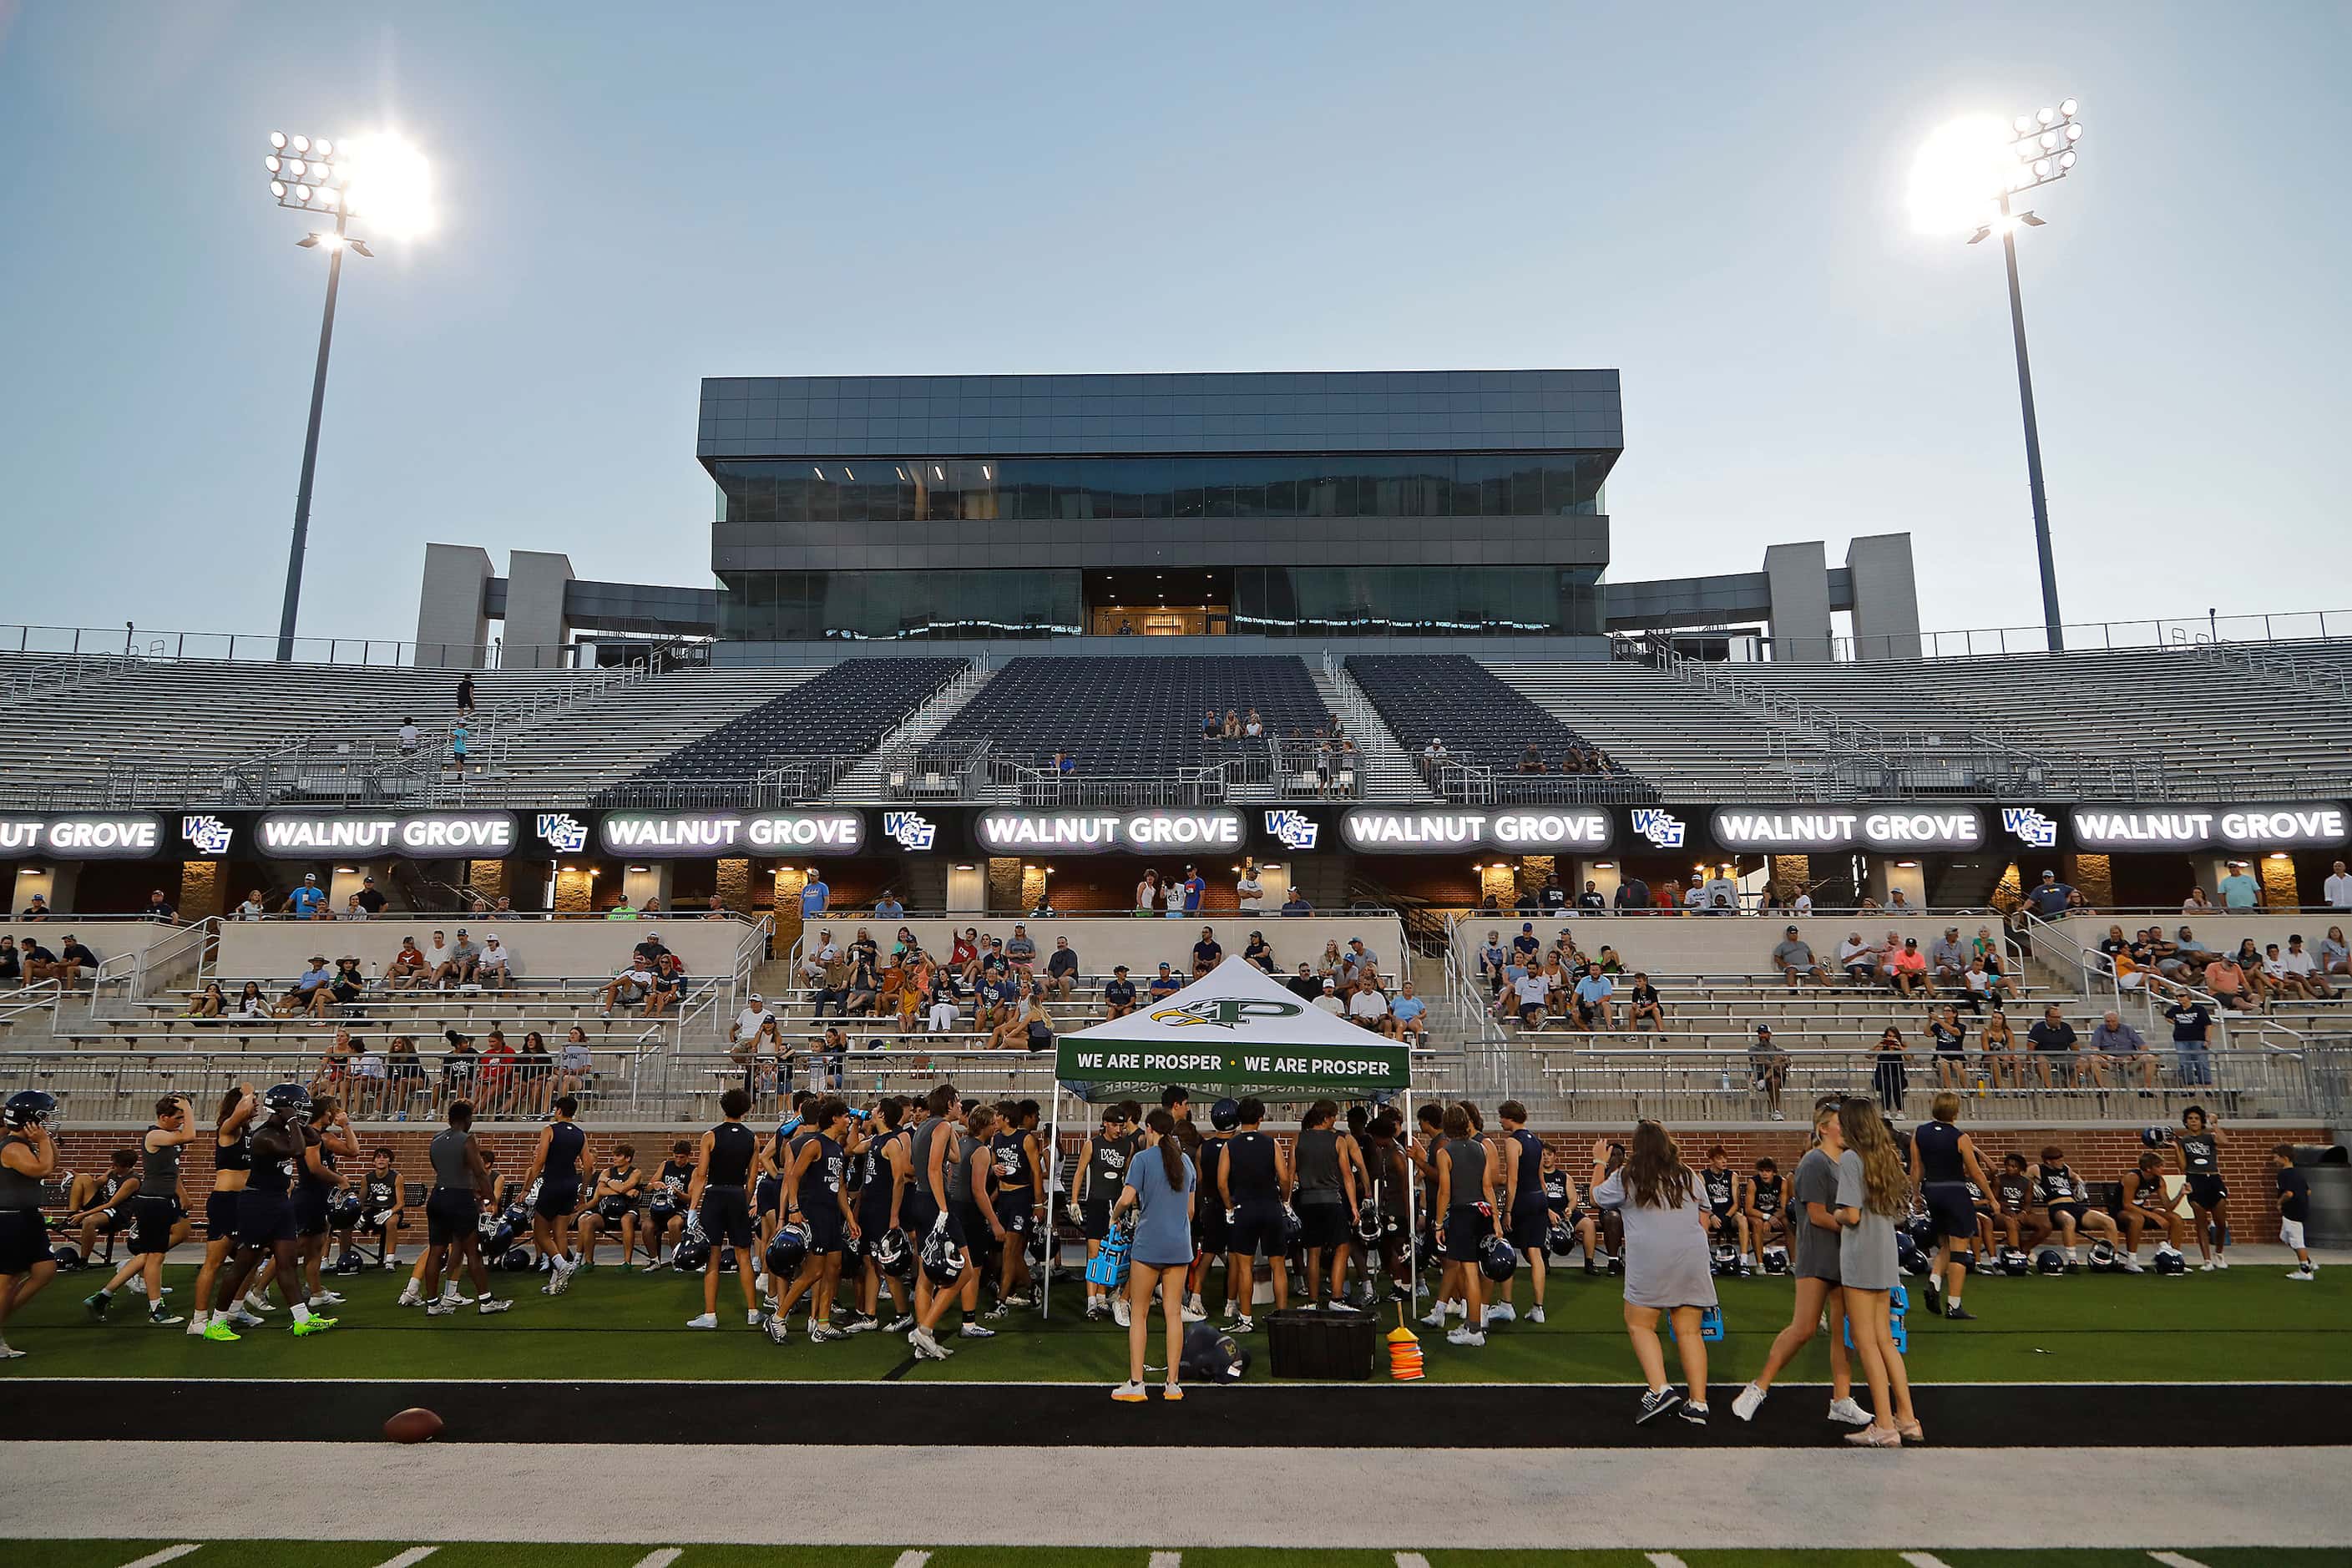 The team takes a break as Walnut Grove High School held their first football pactice on...